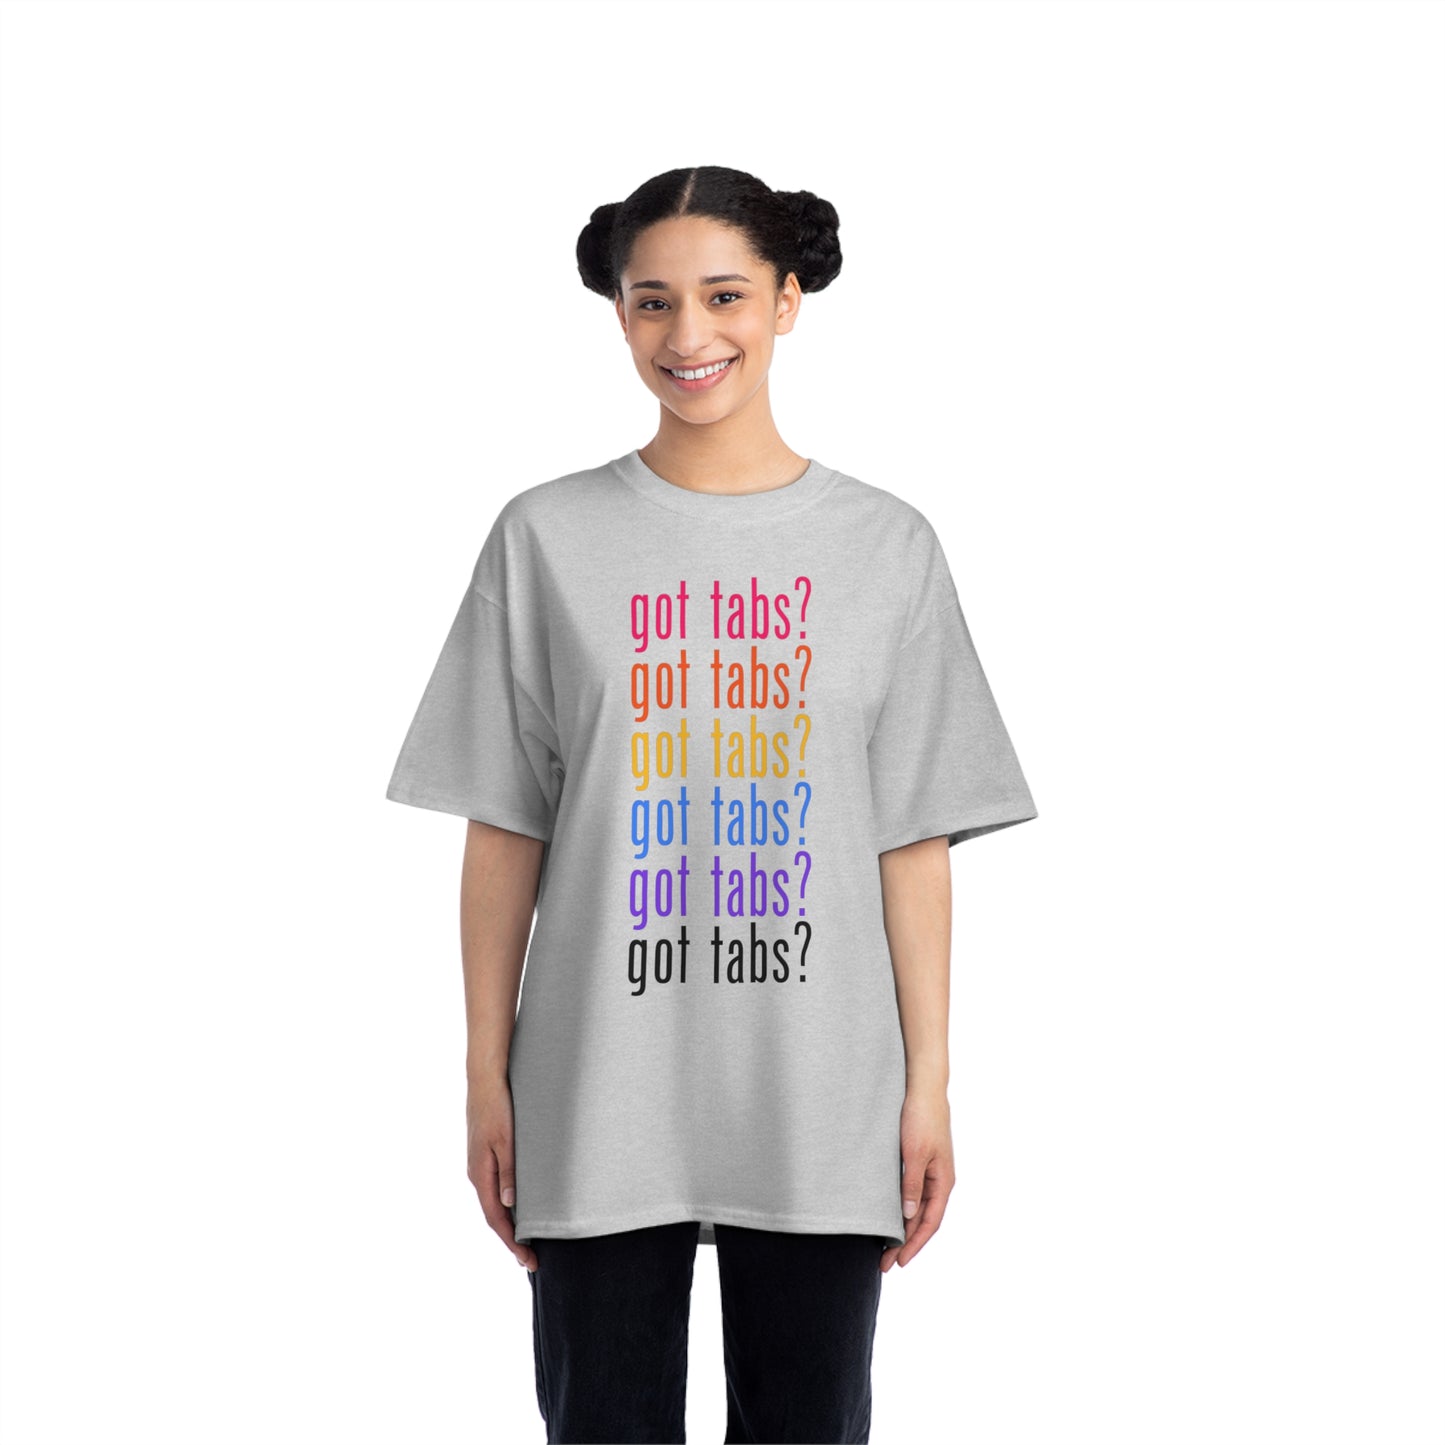 Big & Tall Got Tabs? T-Shirt | Funny Cotton Crew Tee | Plus Sized Shirt | Novelty Gifts for Musicians